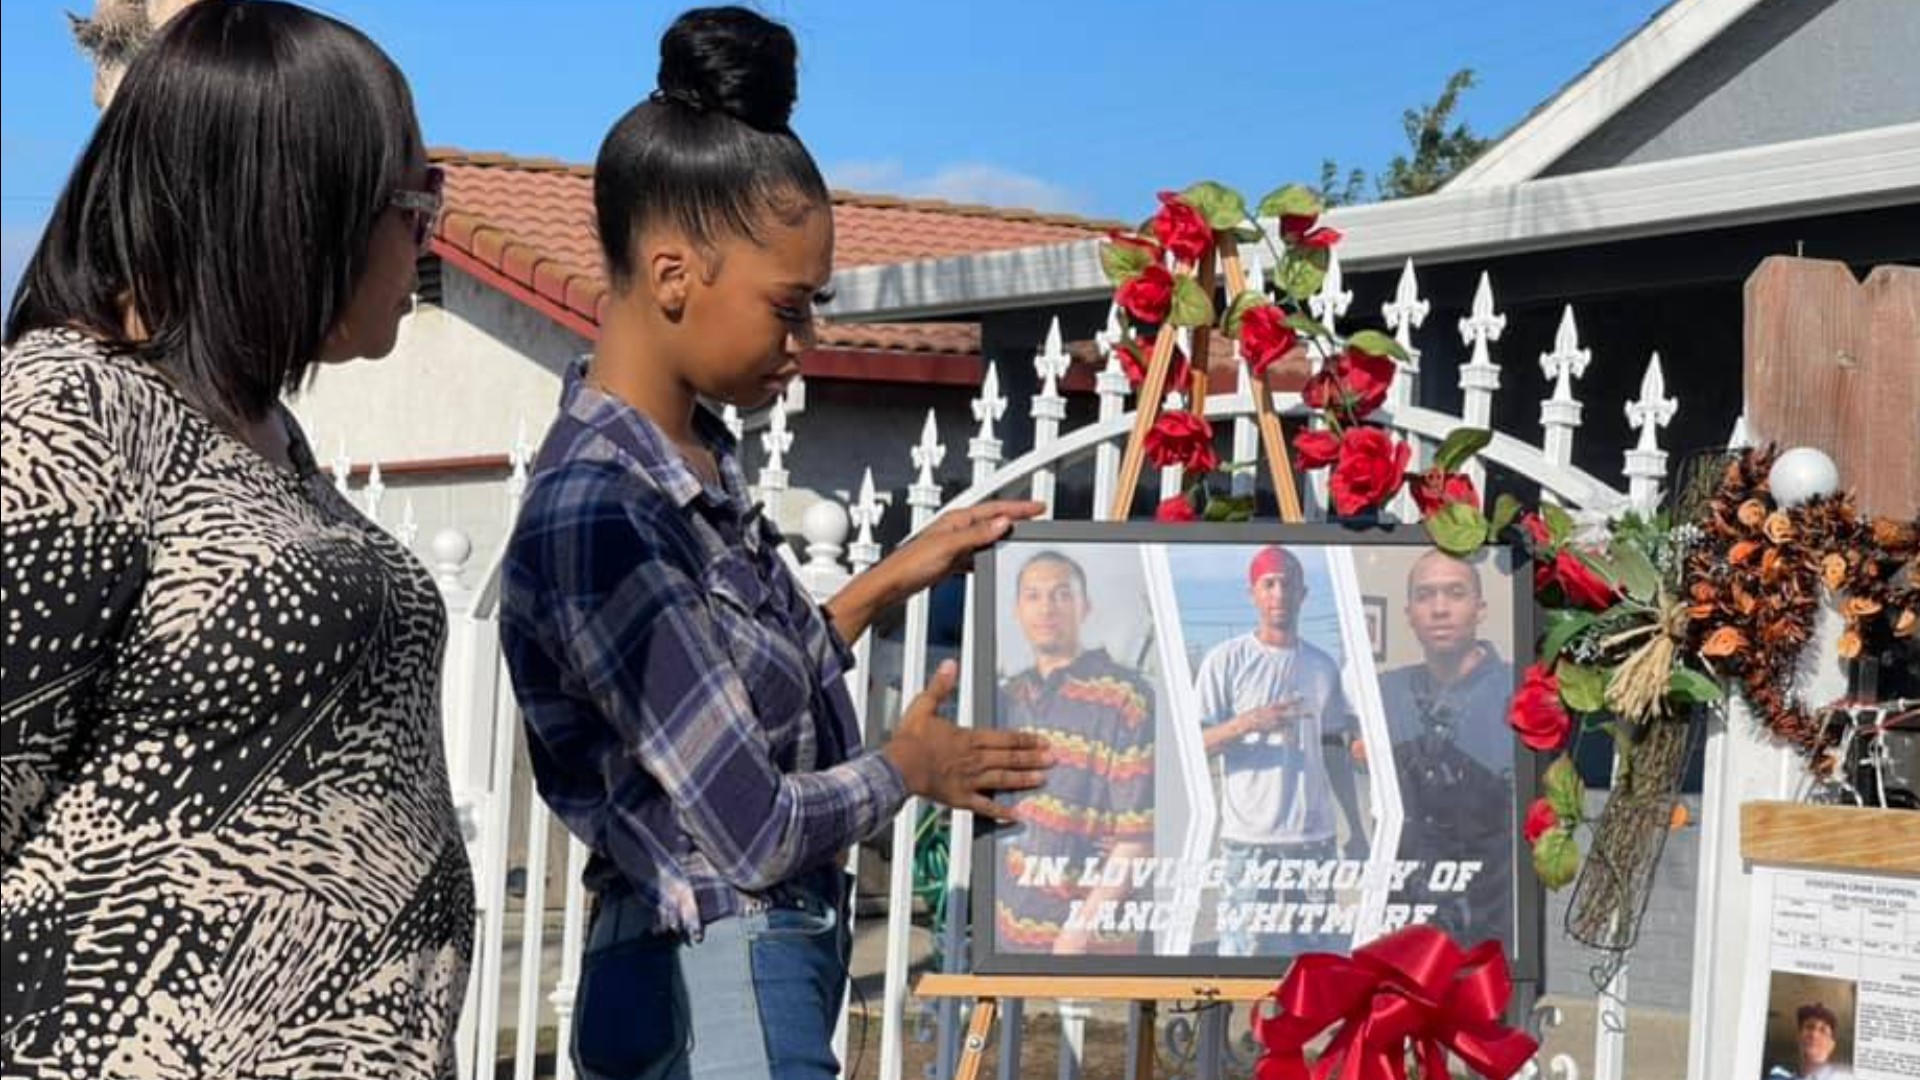 The family of Lance Whitemore, who was shot and killed in Stockton over a year ago, is still seeking answers that will bring those responsible to justice.